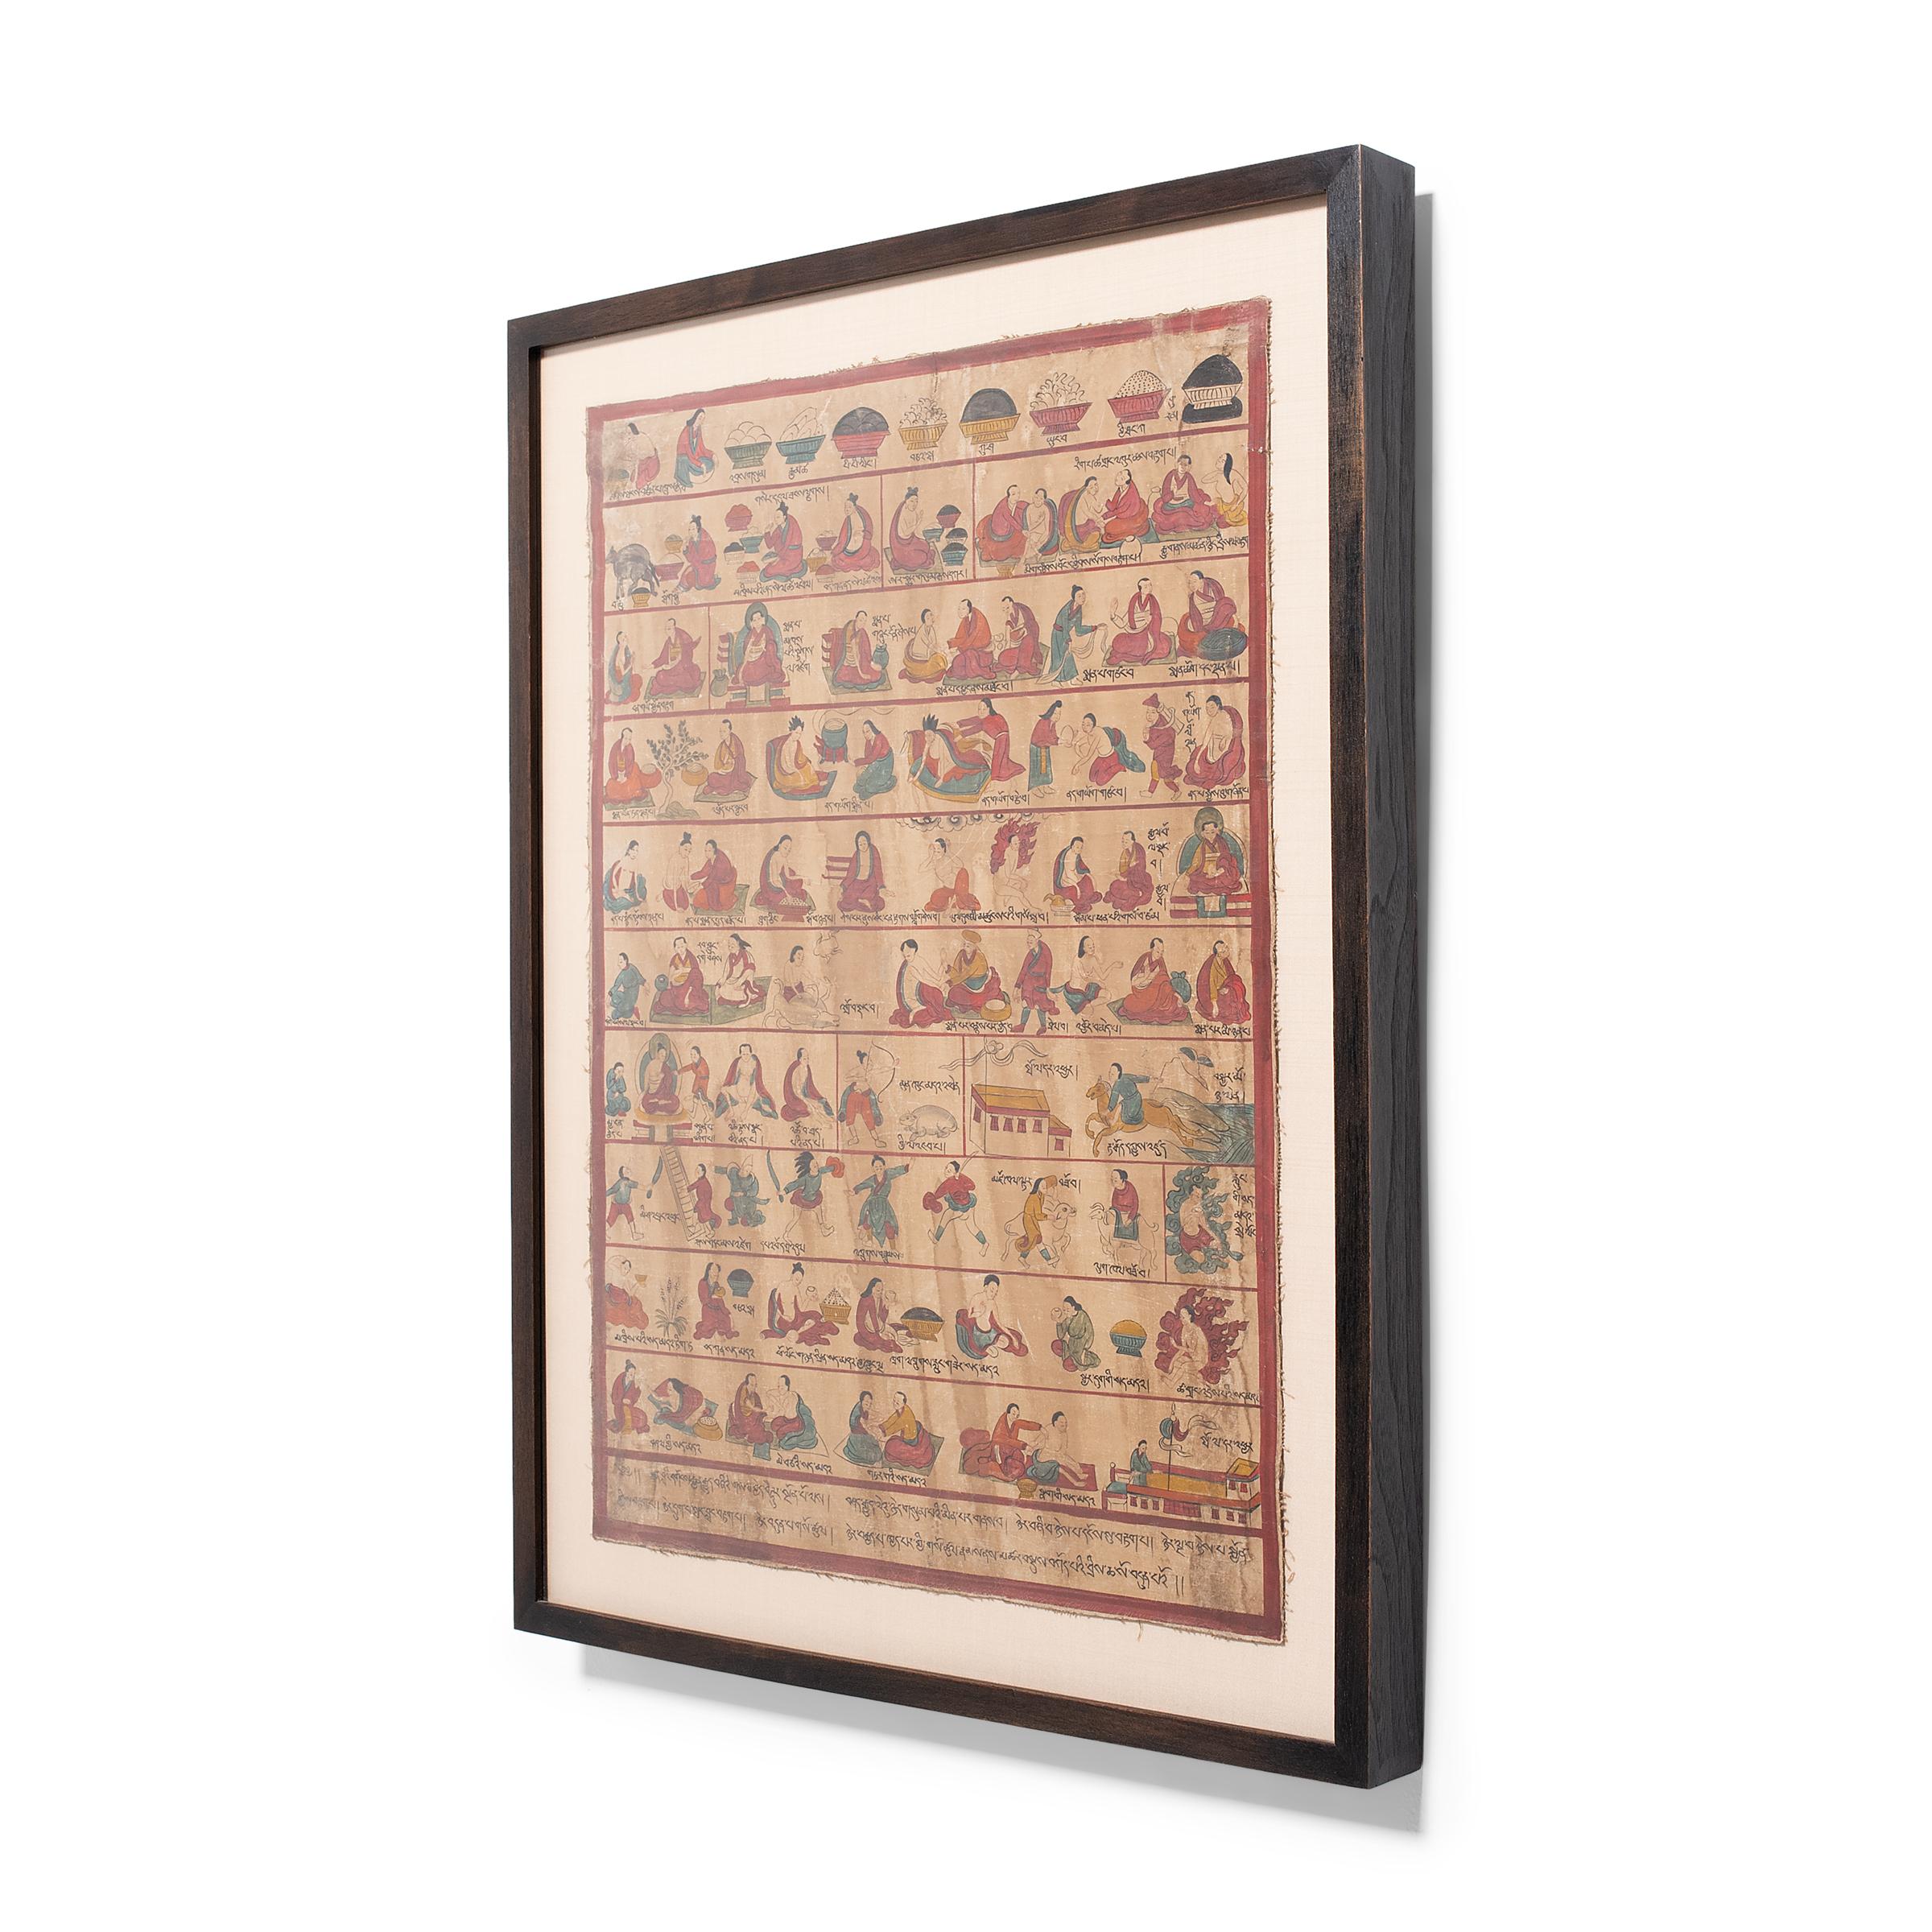 This beautifully detailed Tibetan folk painting dates to the mid-20th century and shares traditional knowledge in the style of a painted Buddhist thangka or manuscript card. Intended as a visual aid for learning, the painting illustrates ritual and